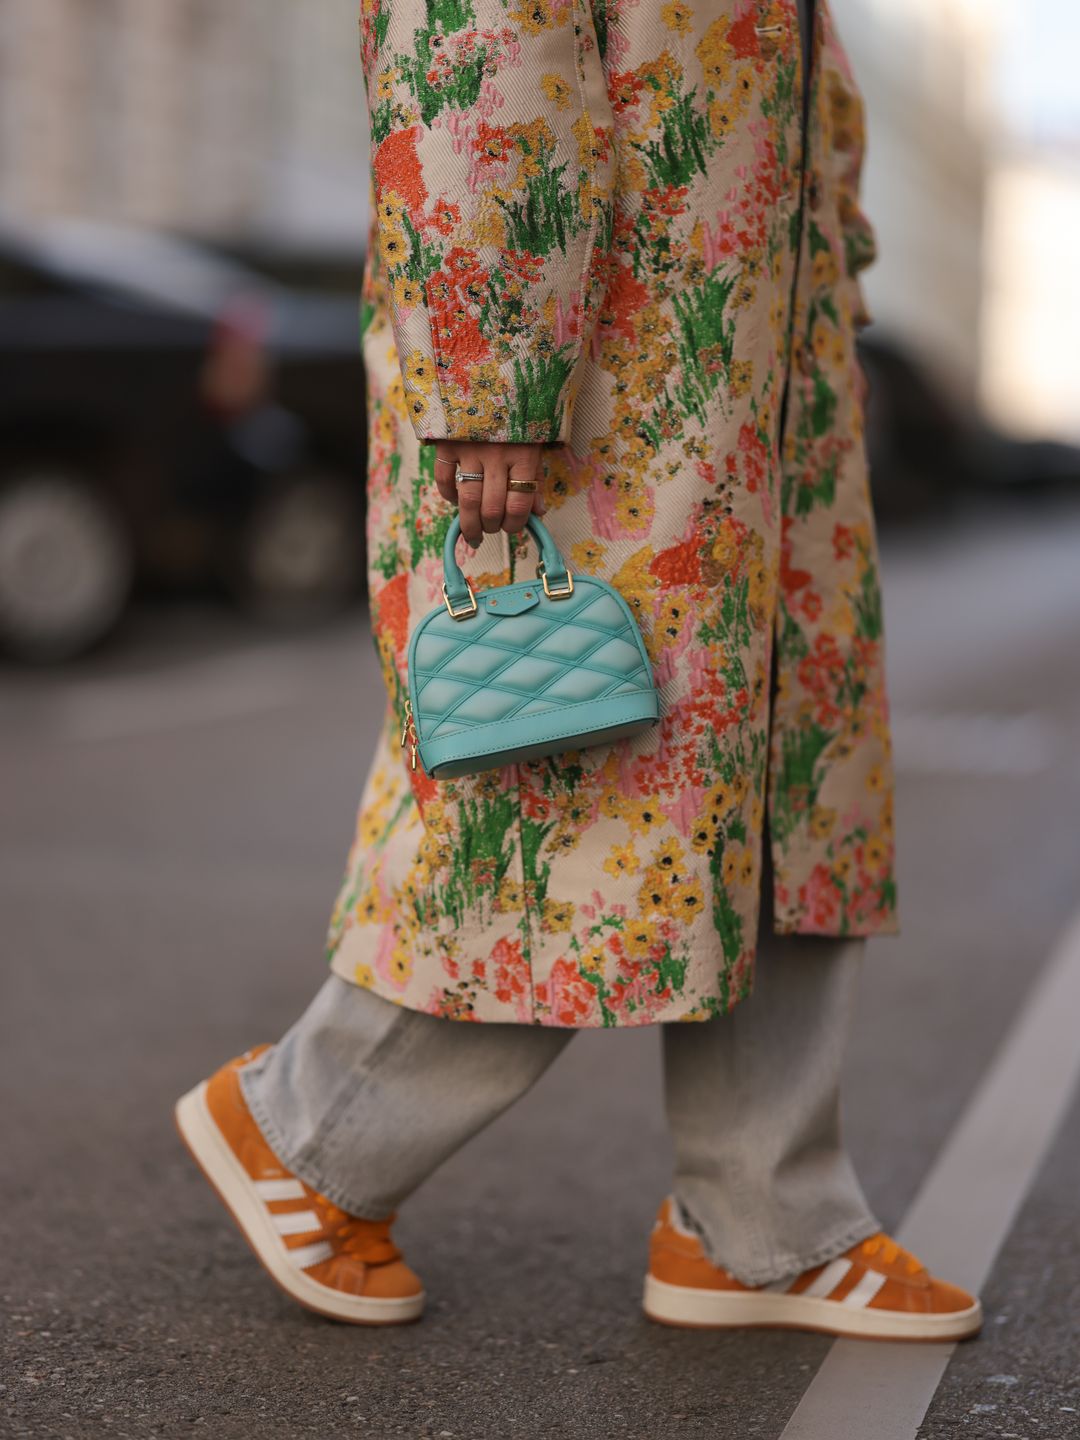 Karin Teigl seen wearing Agolde light grey denim straight leg pants, Stine Goya yellow with colorful flower embroidered pattern long coat and a  Louis Vuitton light blue leather Alma mini bag